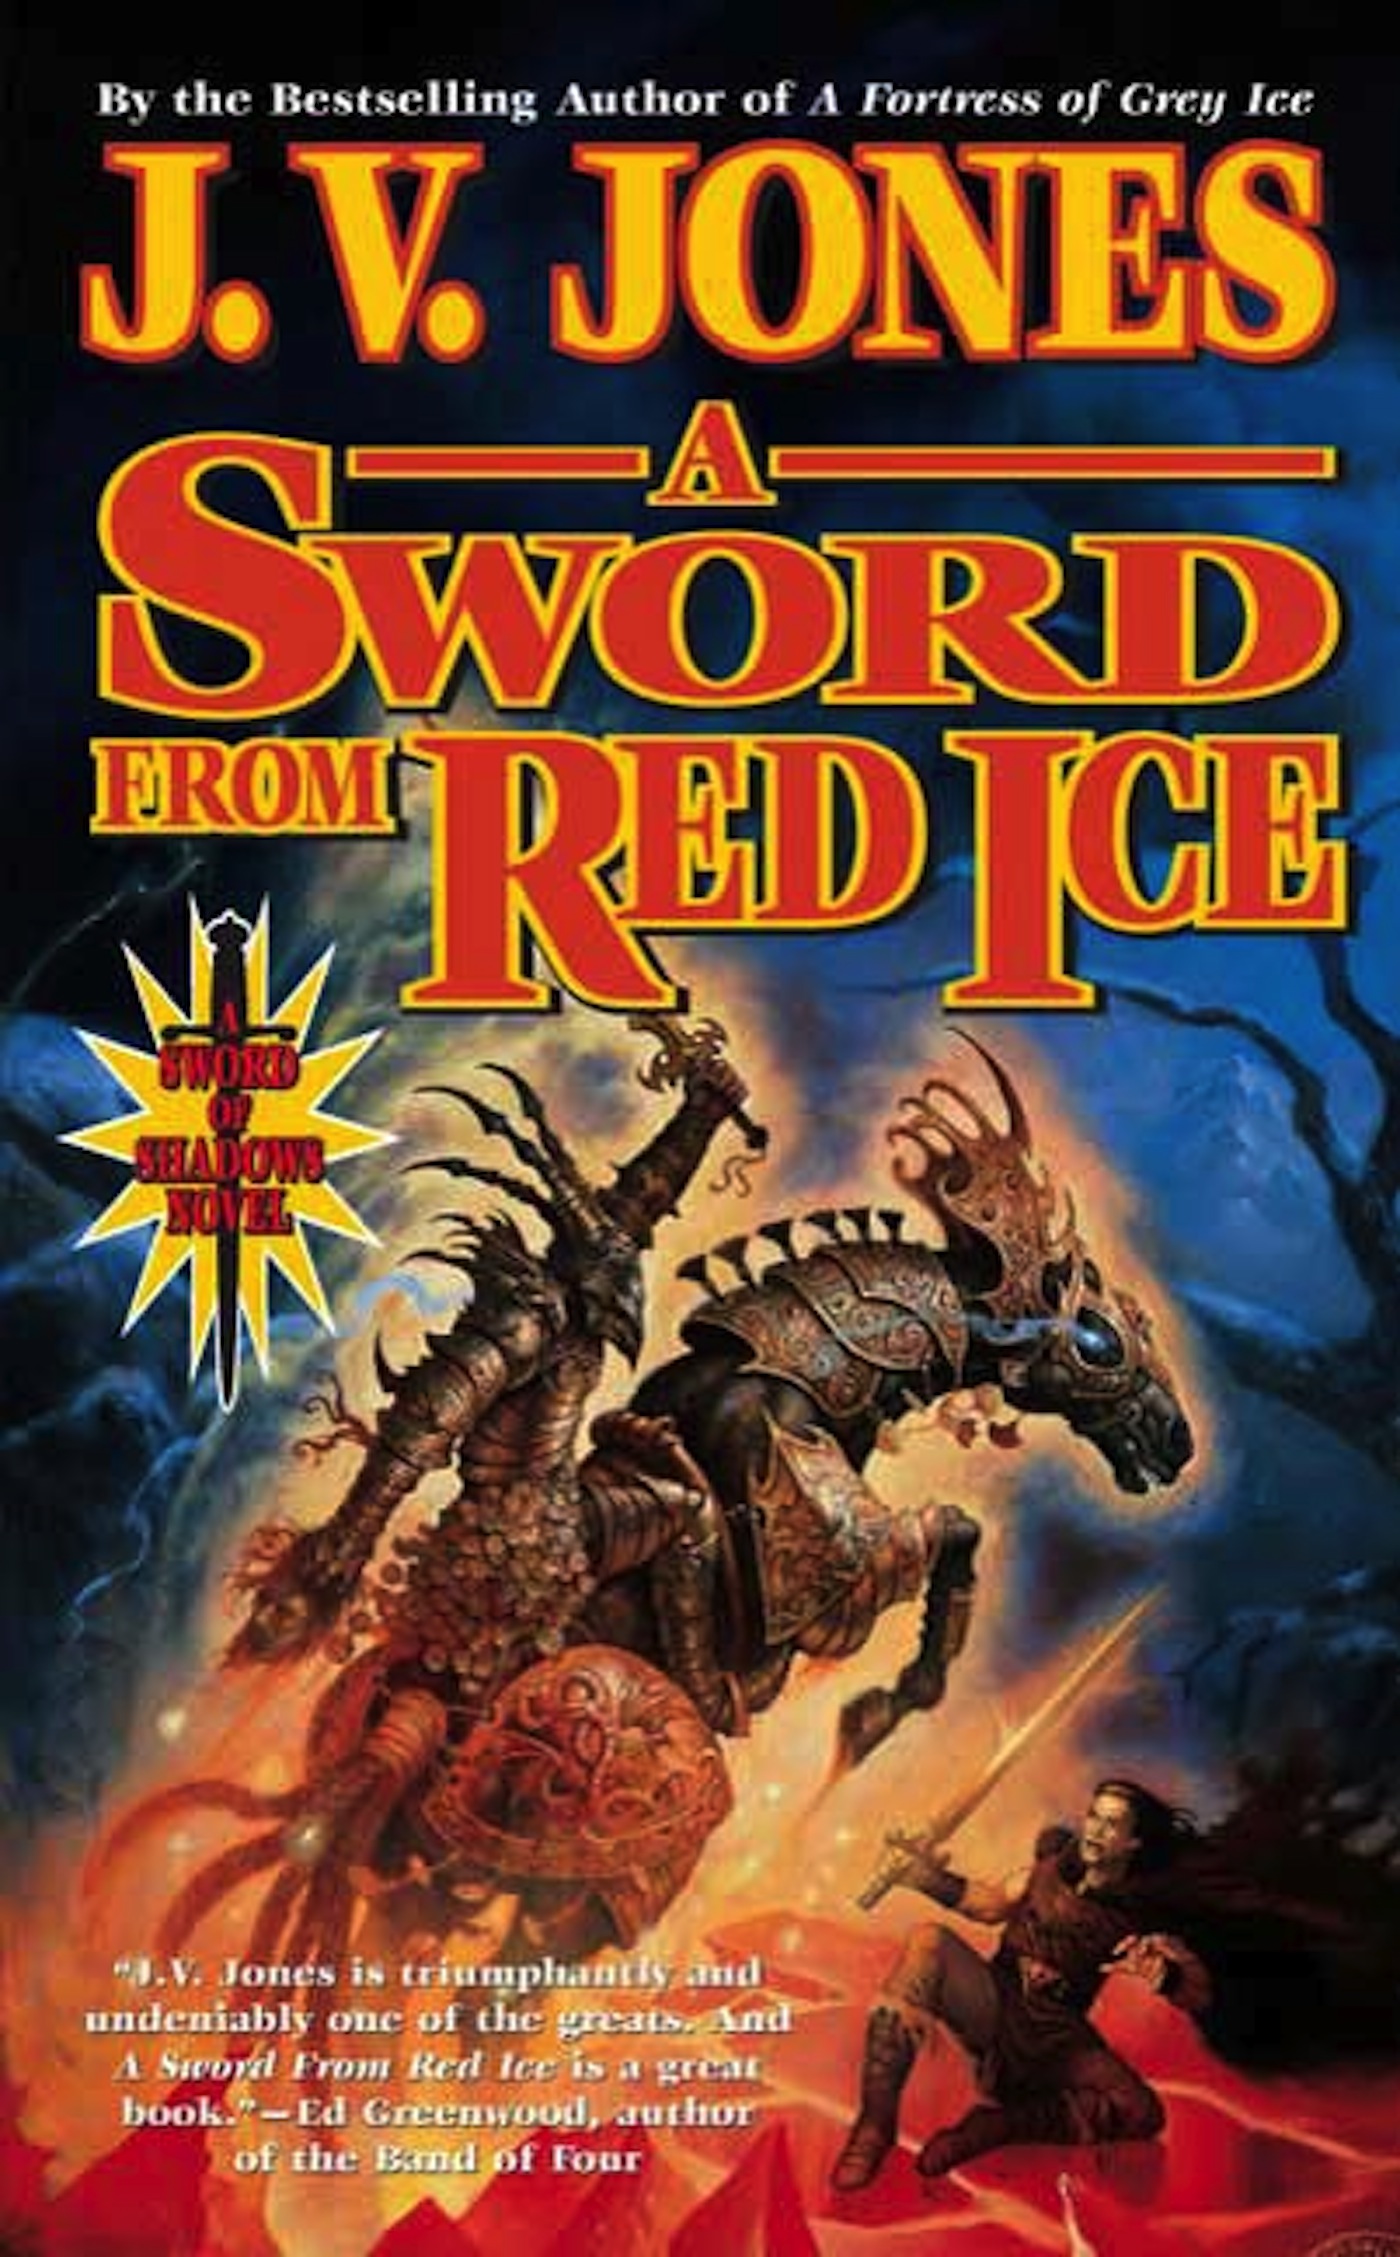 A Sword from Red Ice : Book Three of Sword of Shadows by J. V. Jones